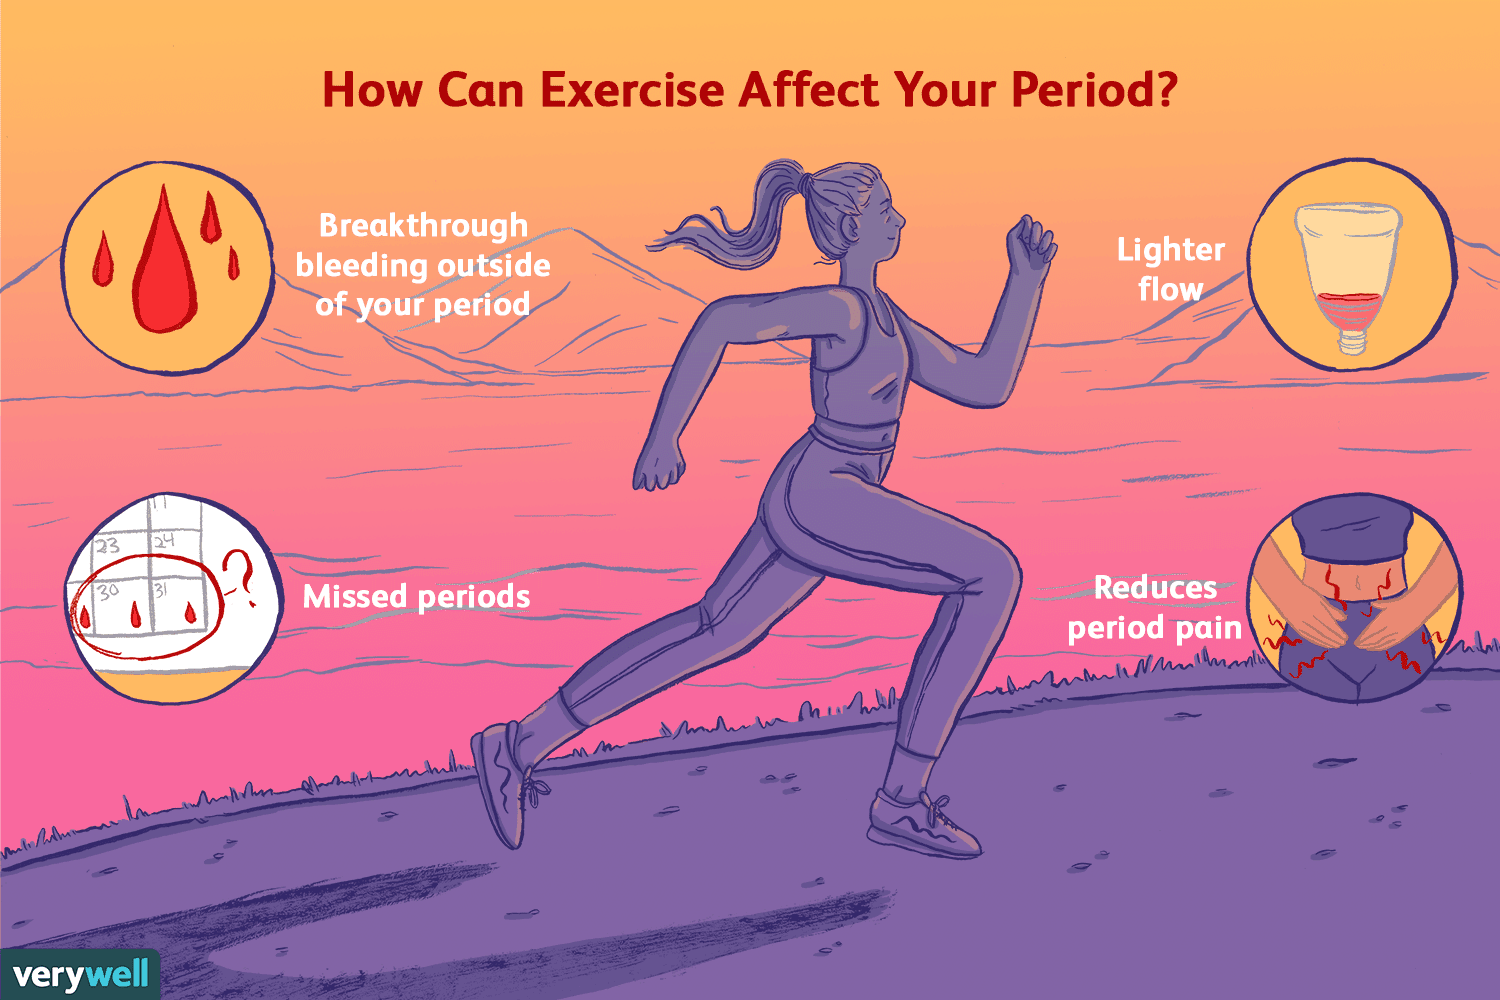 Changes Exercise May Have on Your Period